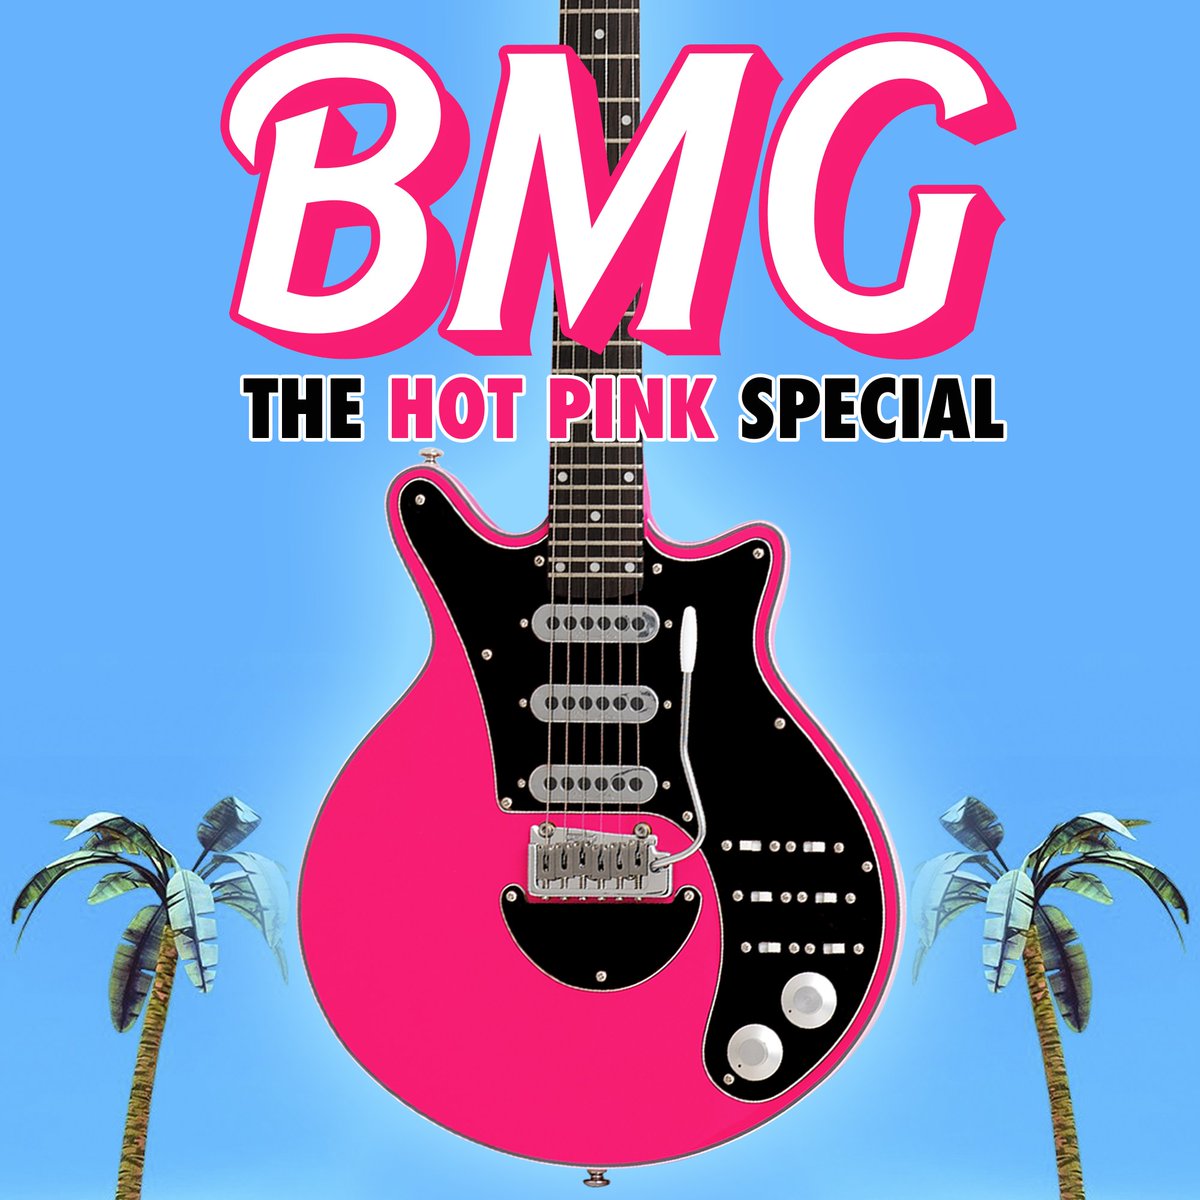 The brand new @BrianMayGuitars LE Series Special in HOT PINK has arrived!! bit.ly/BMG-HotPink